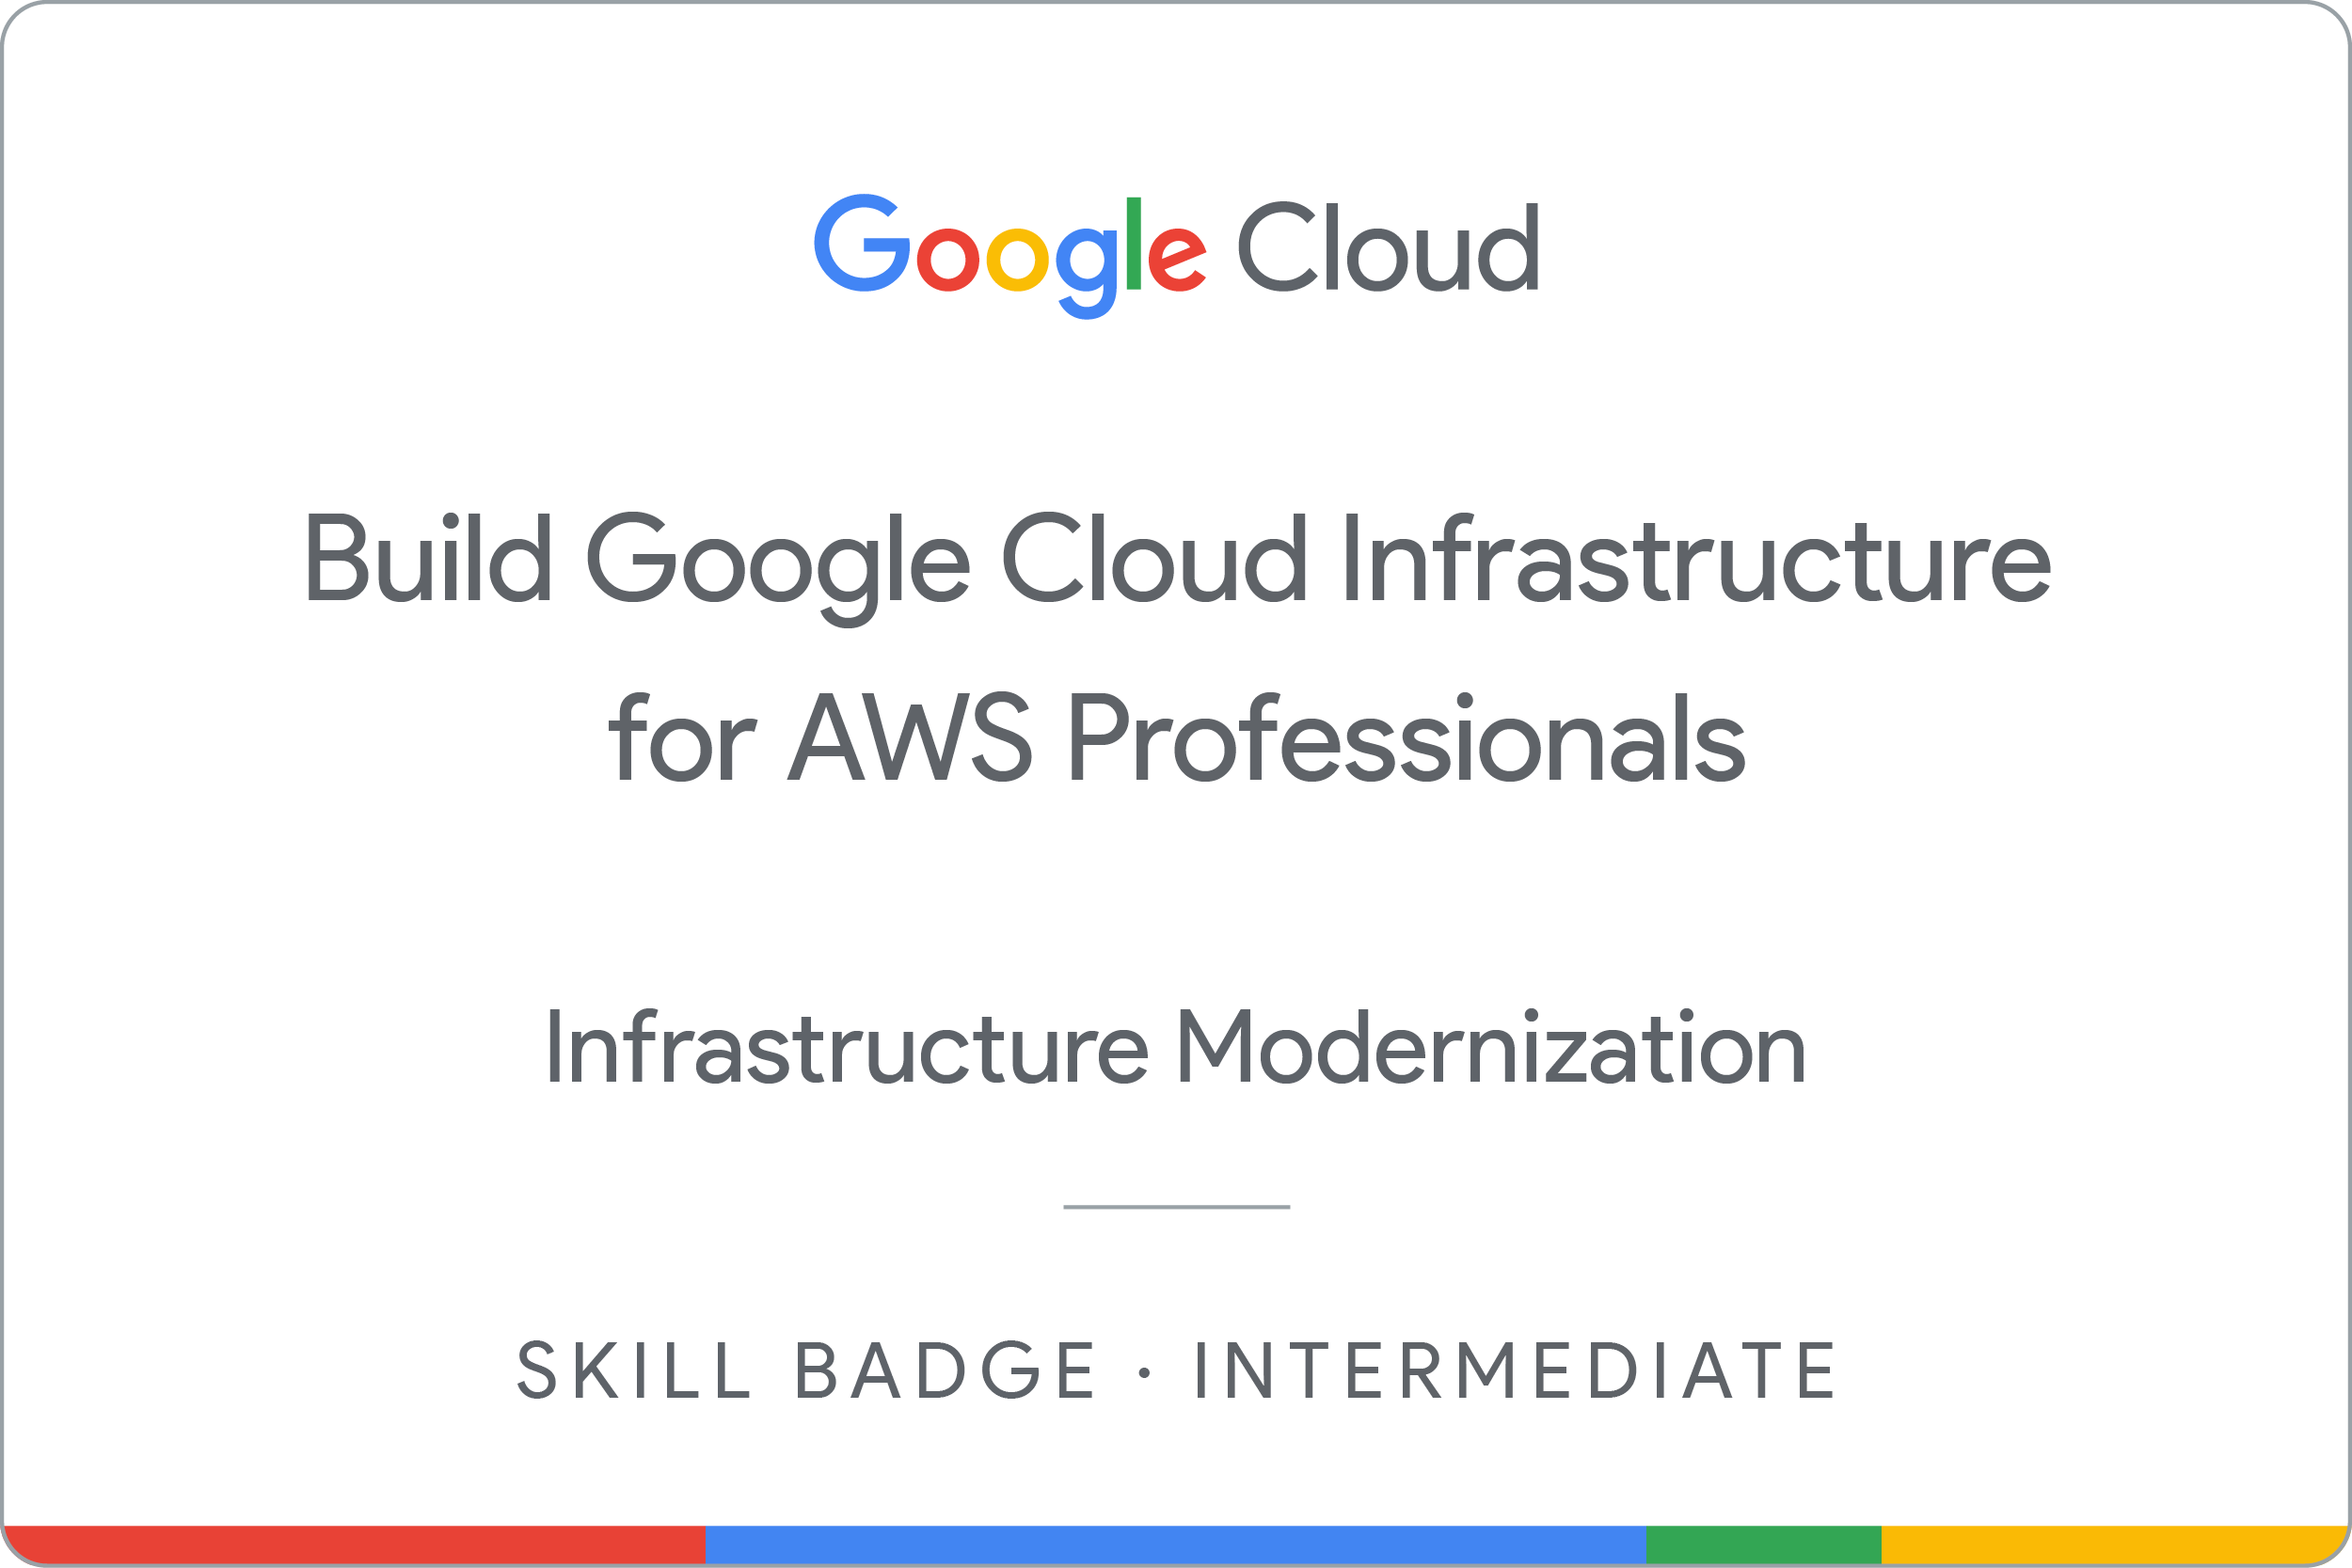 Build Google Cloud Infrastructure for AWS Professionals